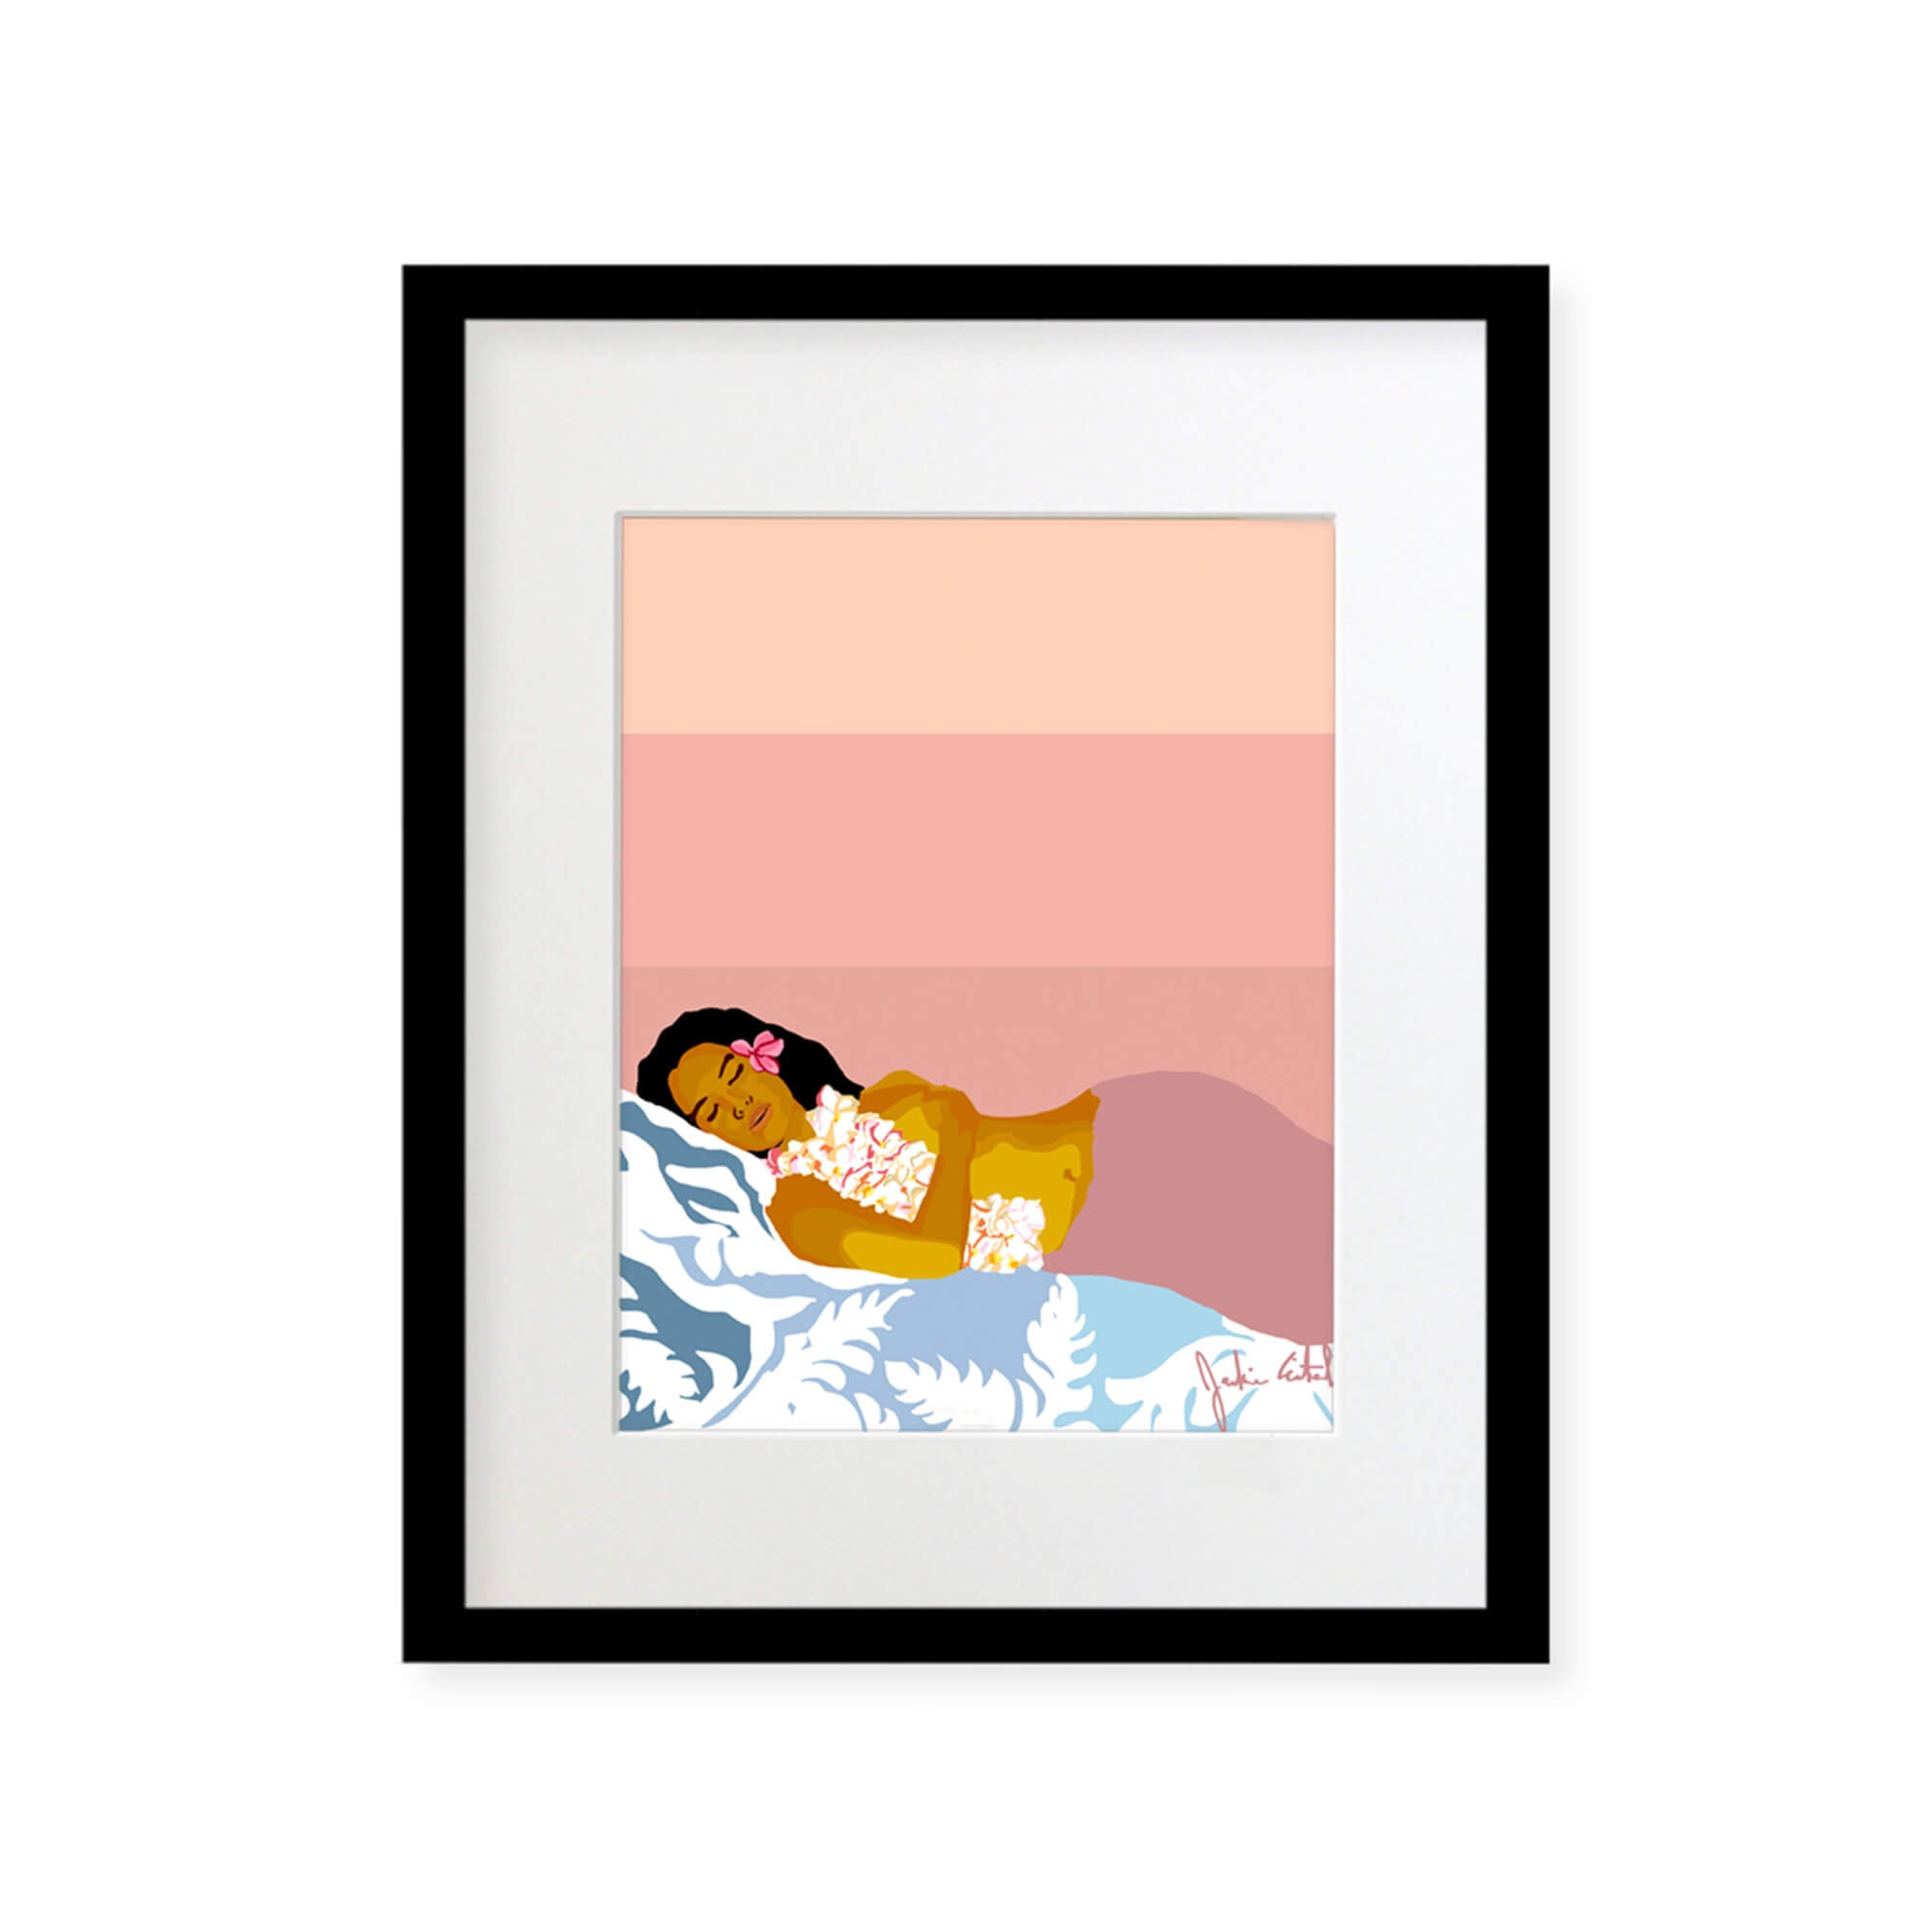 A framed matted art print featuring a local Hawaiian woman wearing a flower lei while sleeping peacefully by Hawaii artist Jackie Eitel